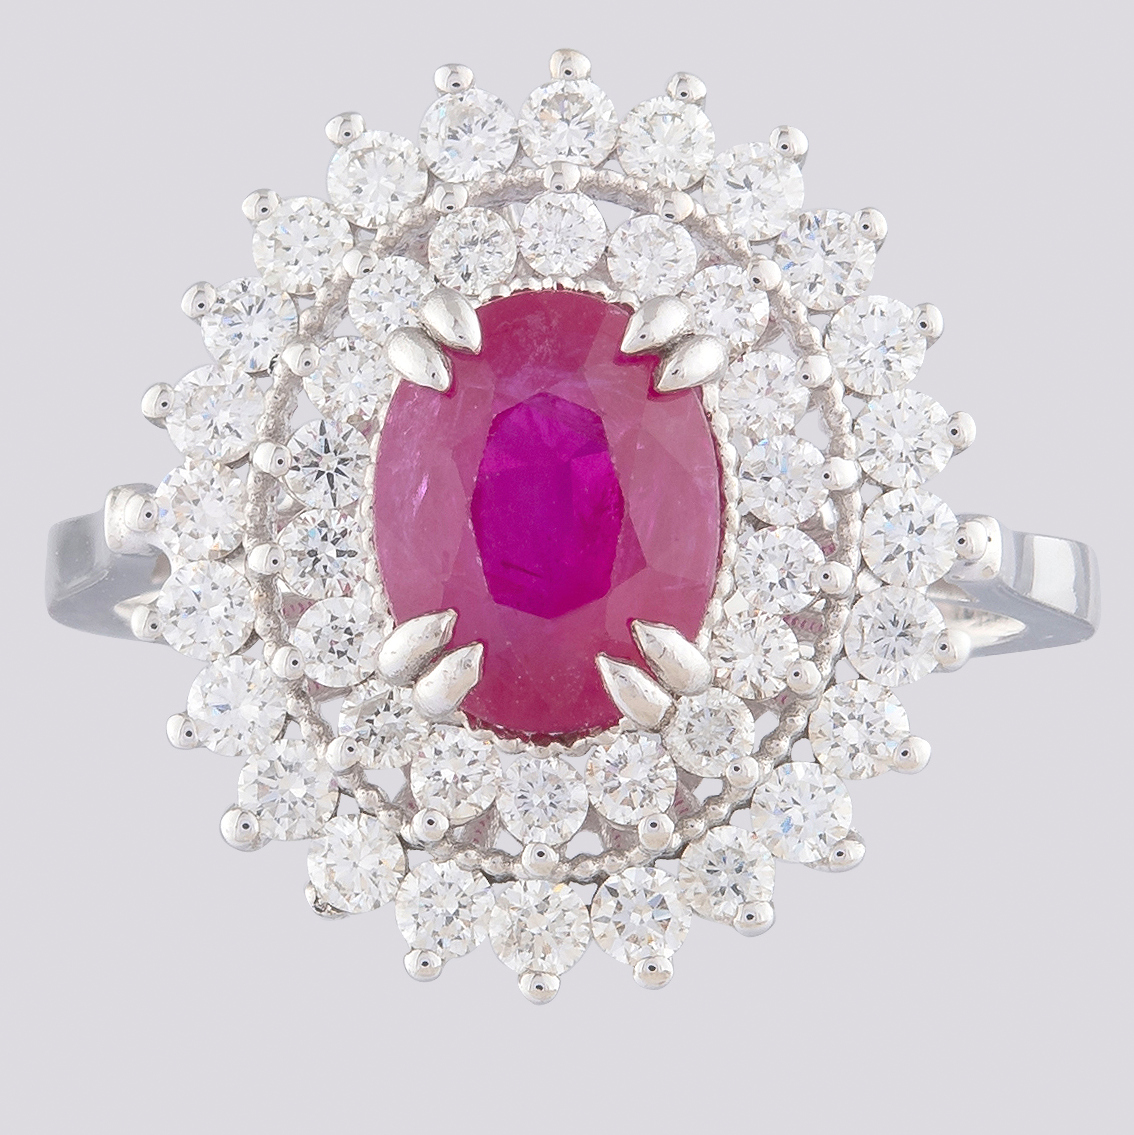 Certificated 14K White Gold Diamond & Ruby Ring / Total 2.9 ct - Image 3 of 4